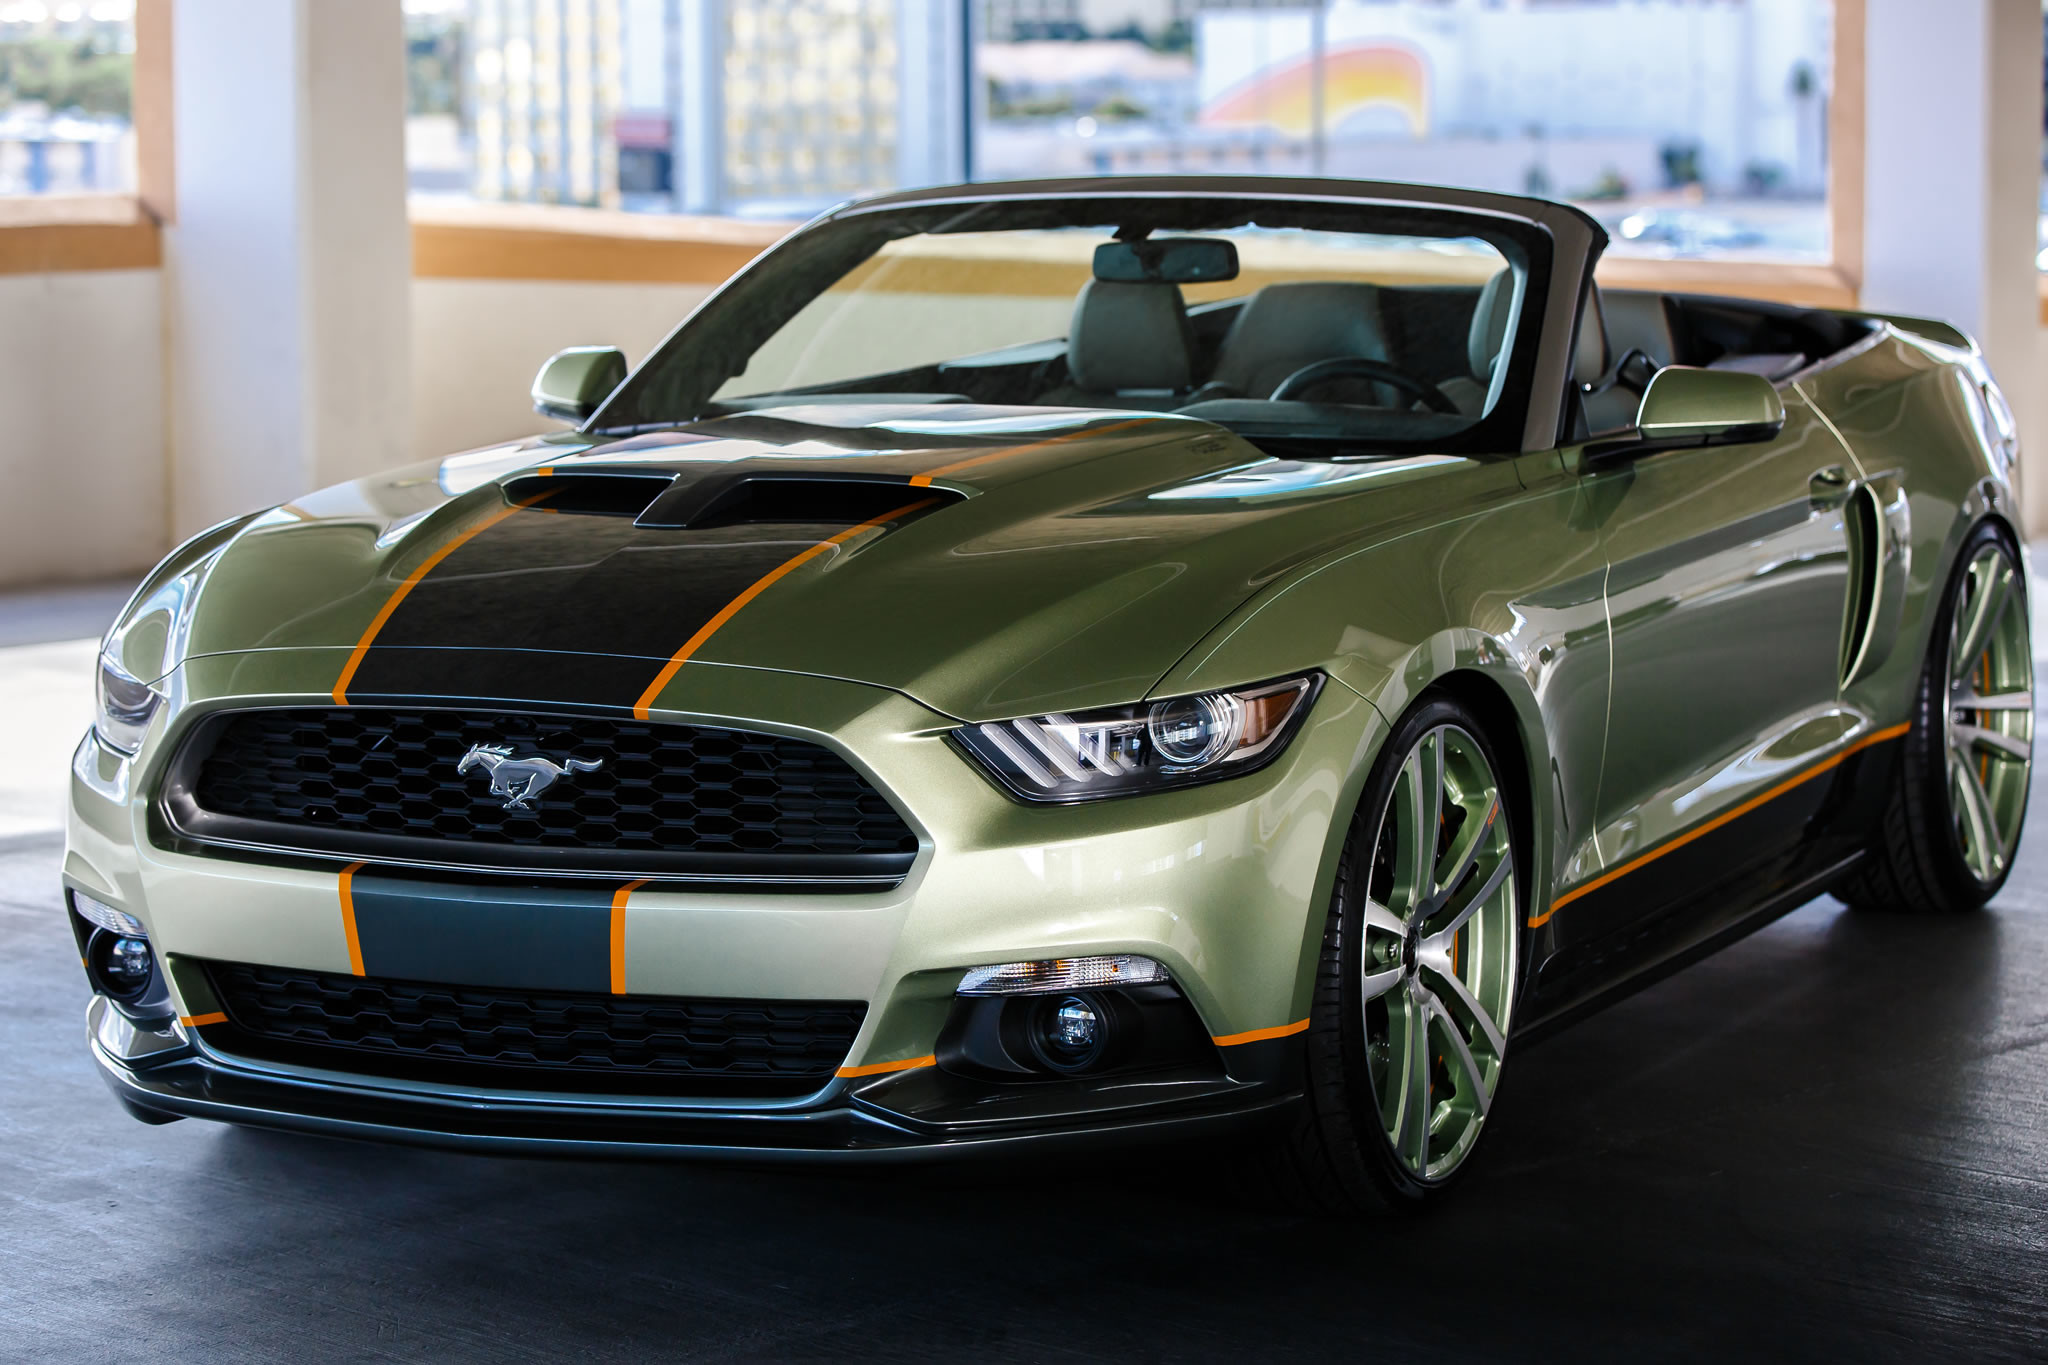 Customized Ford Mustangs At 2014 Sema Front Photo Chip 2048x1365